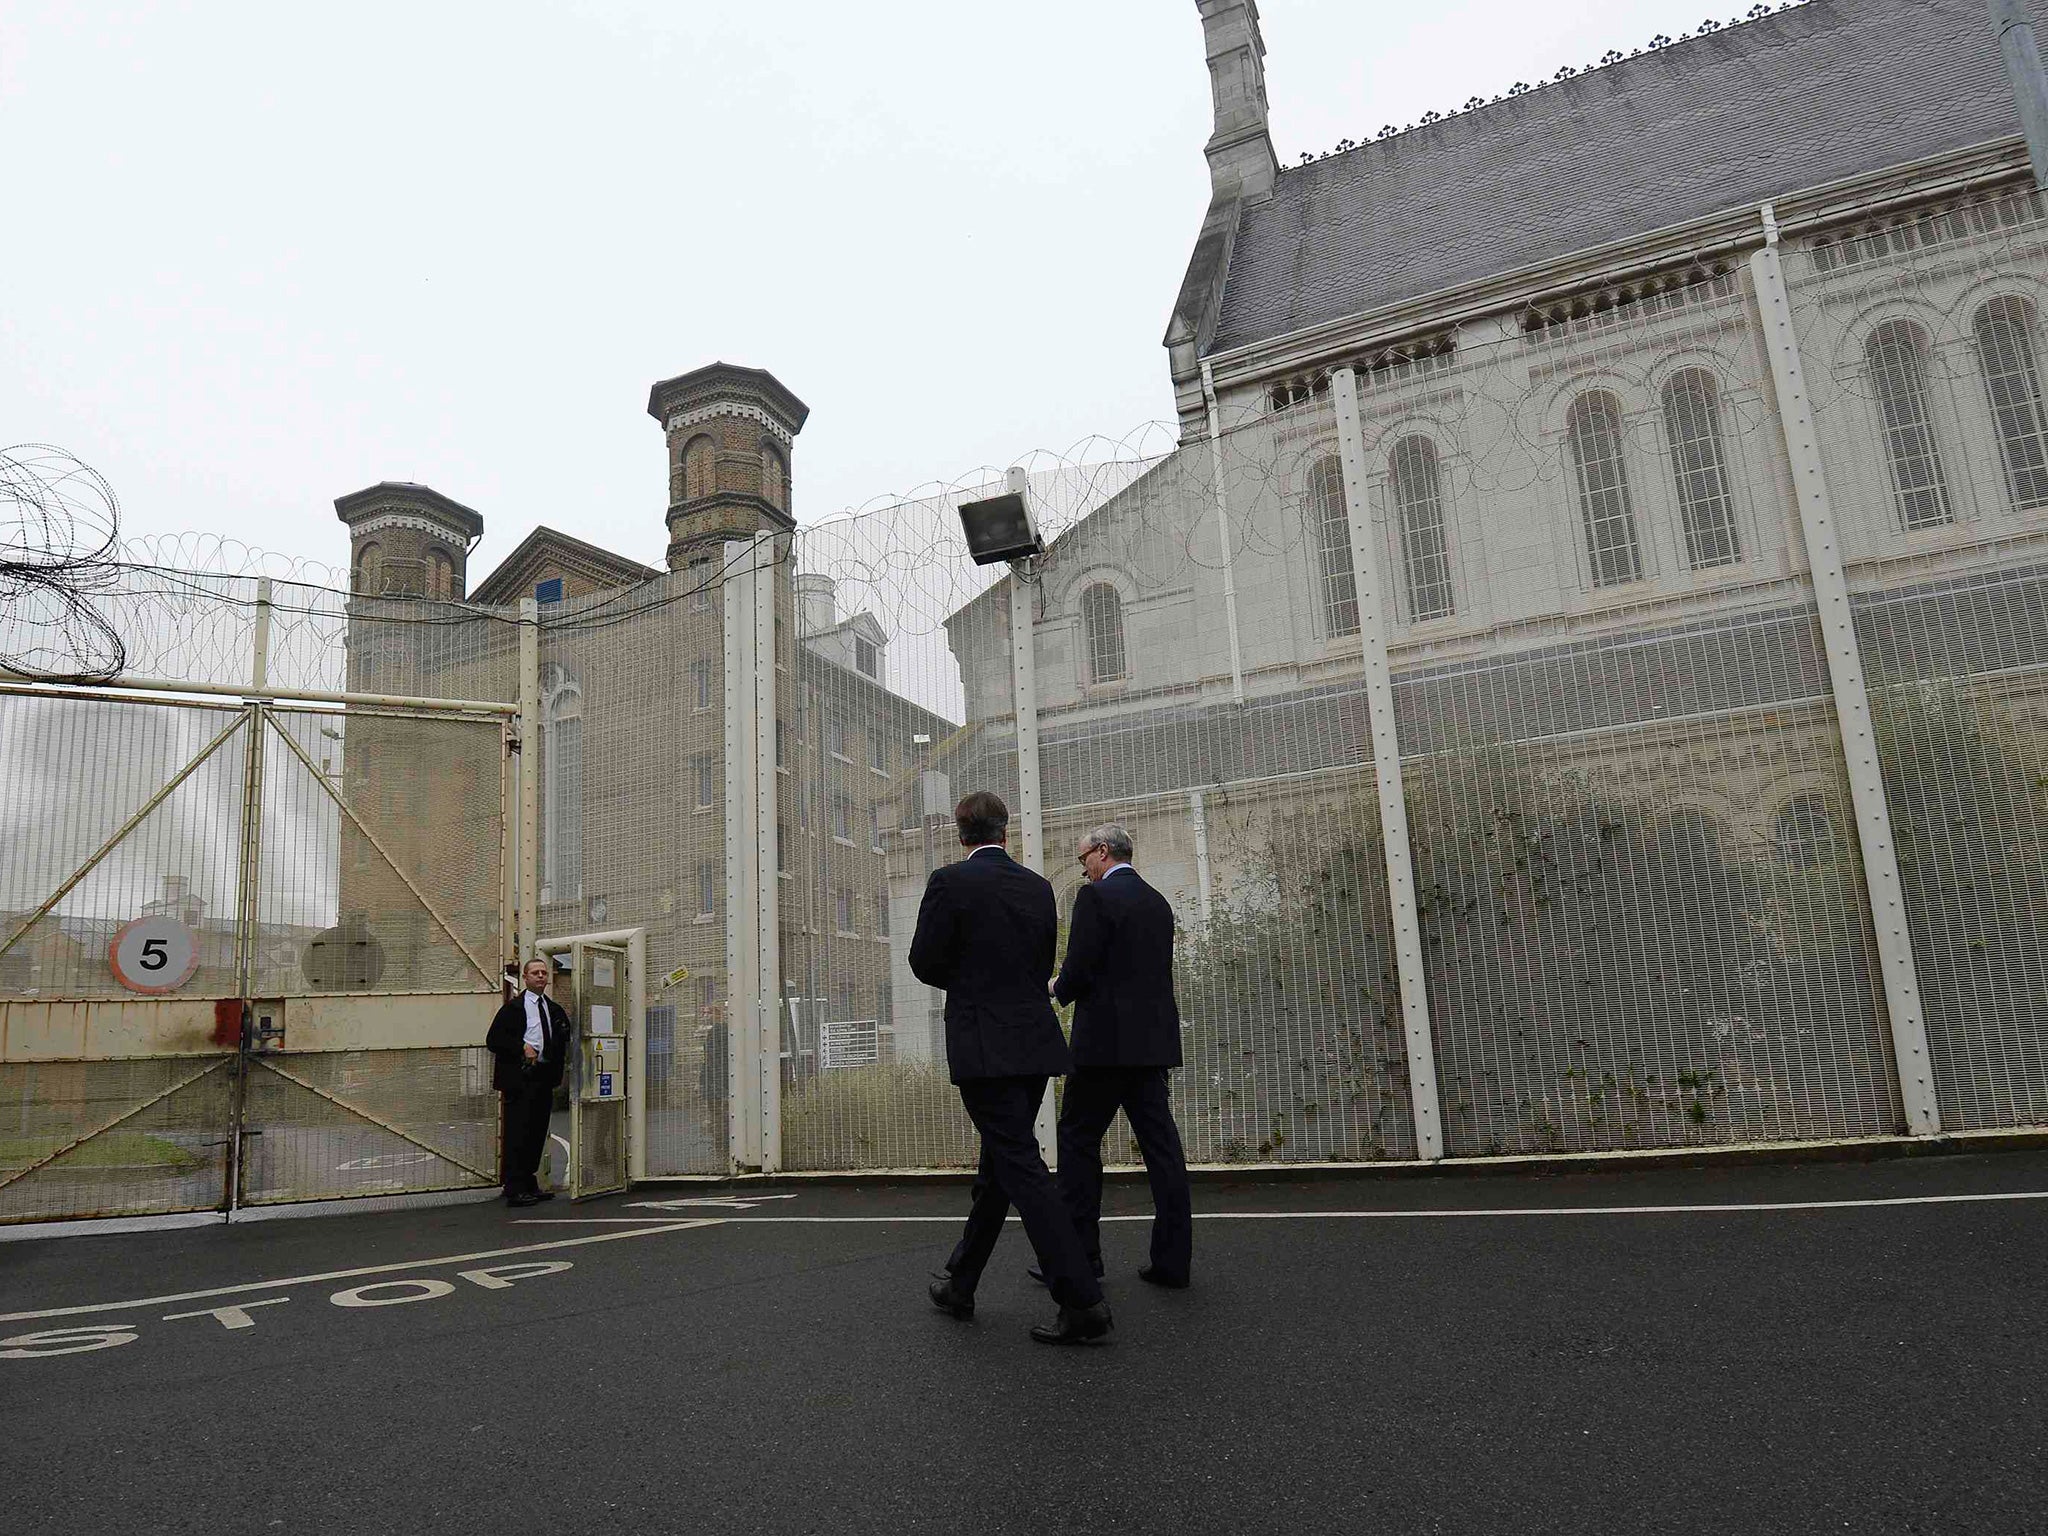 The walkout at Wormwood Scrubs will place renewed focus on the Government's prison reforms